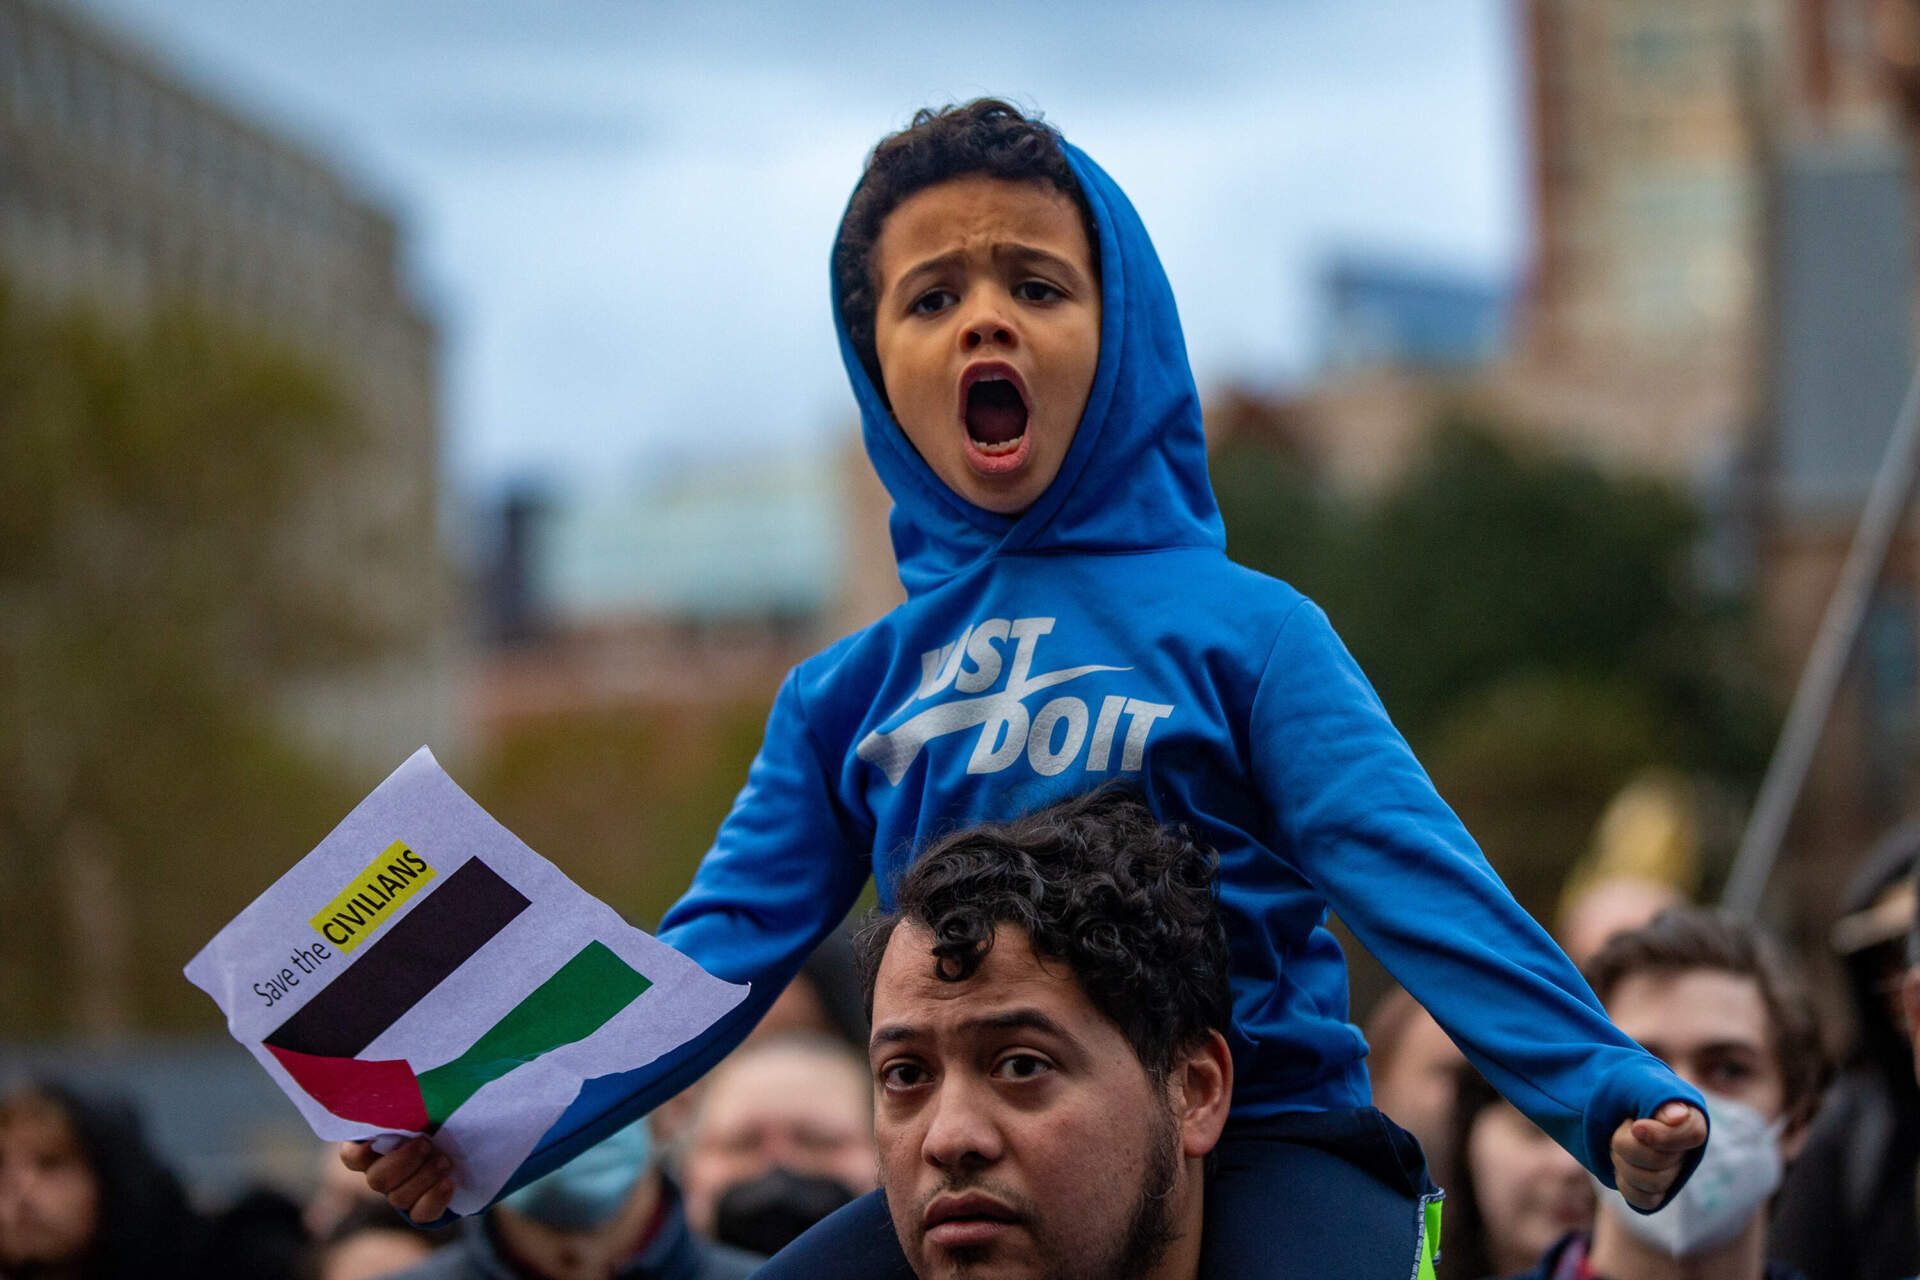 A young protestor shouts during a pro-Palestinian rally in front of the Boston Public Library in Copley Square. (Jesse Costa/WBUR)